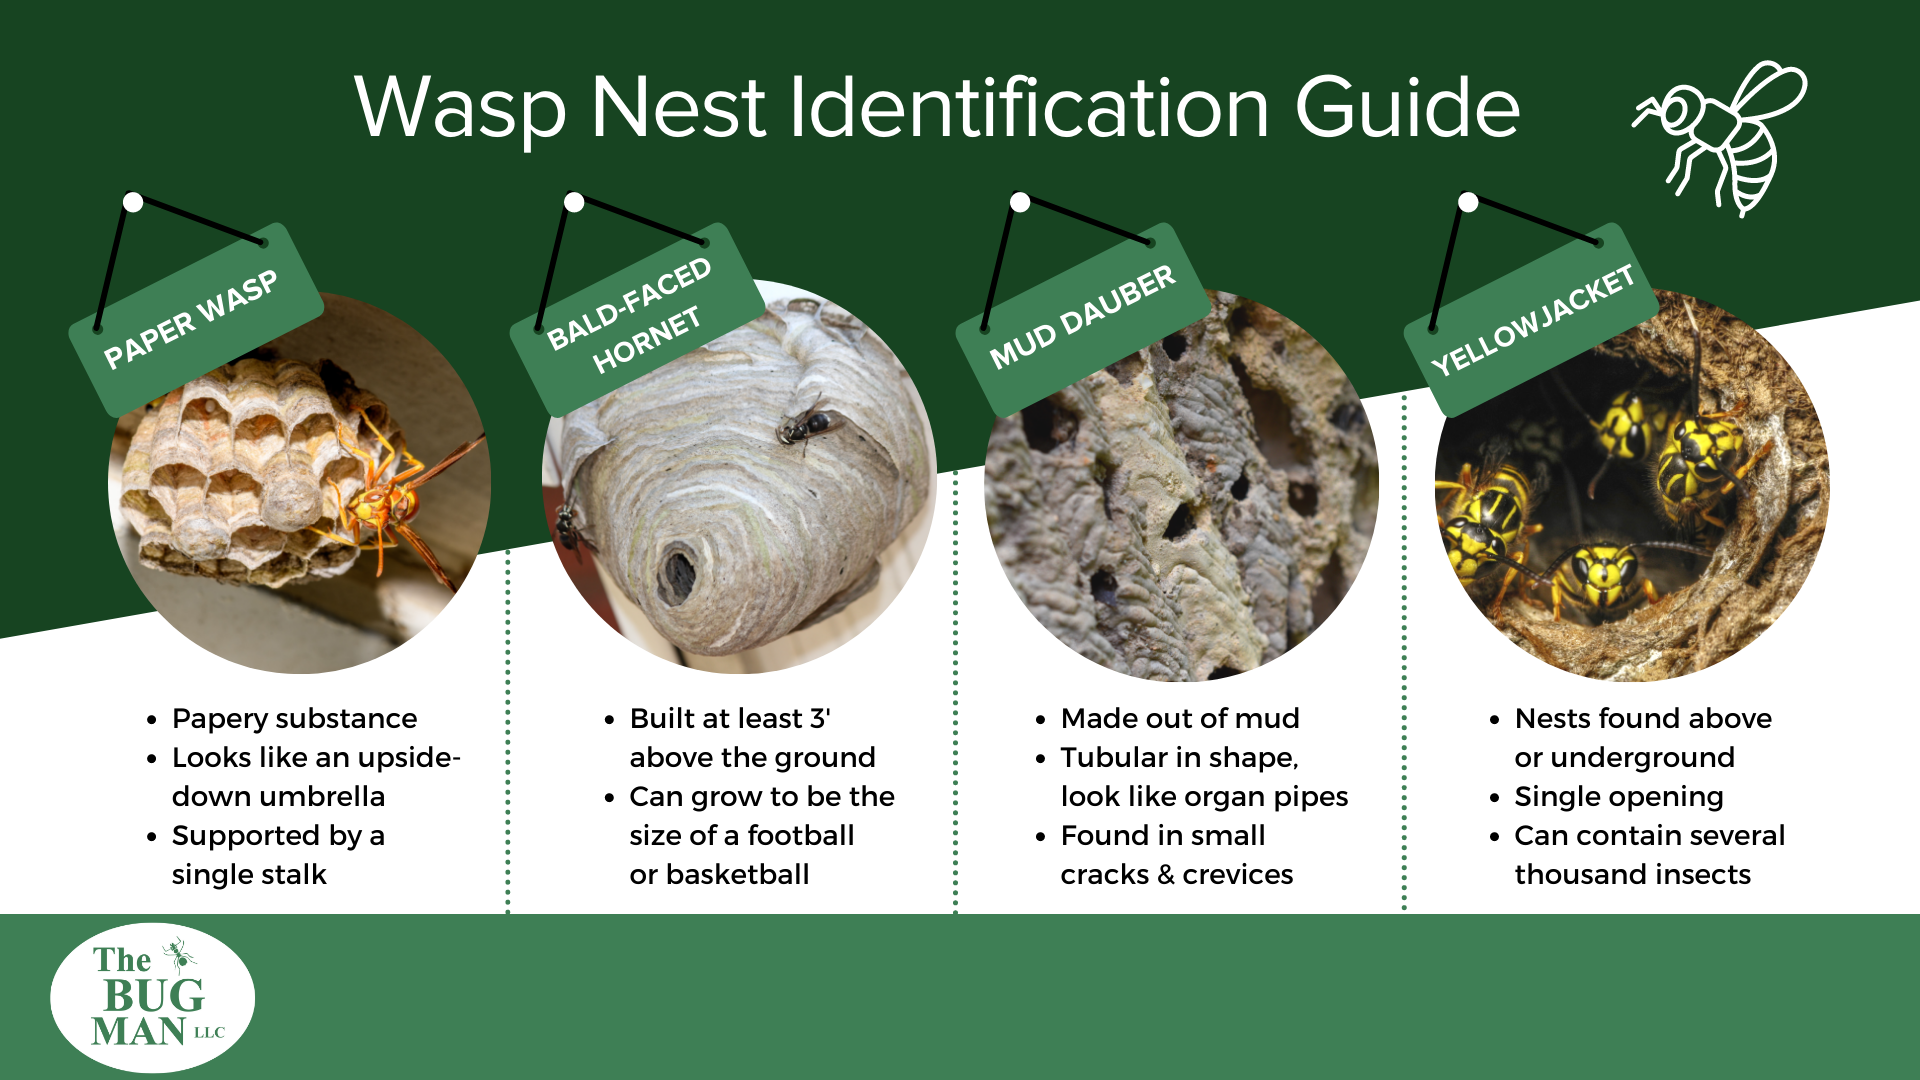 Wasp nest identification infographic in Central TN - The Bug Man 